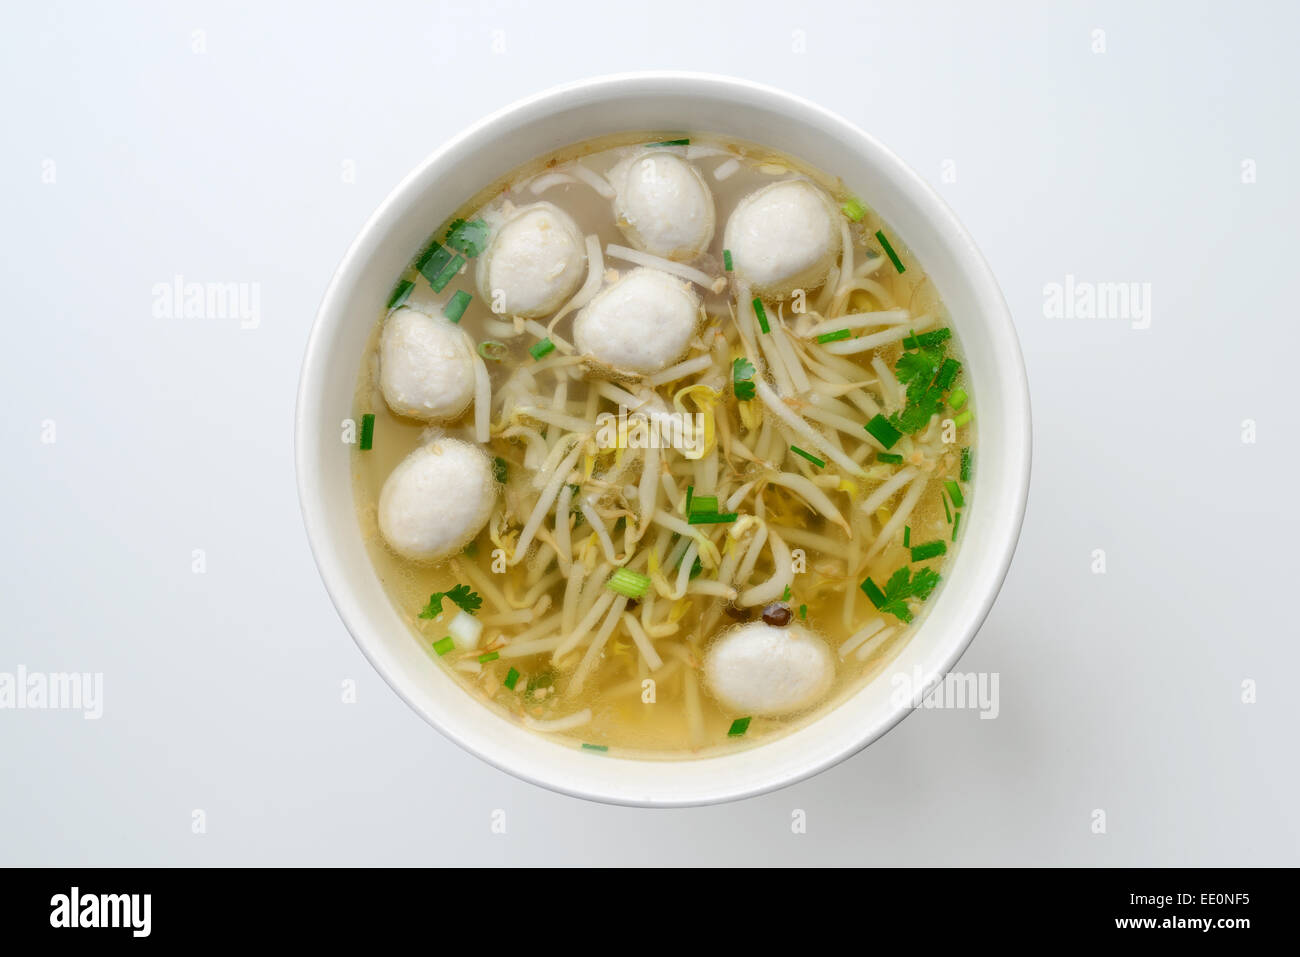 noodles soup with meat ball, bean sprouts Stock Photo